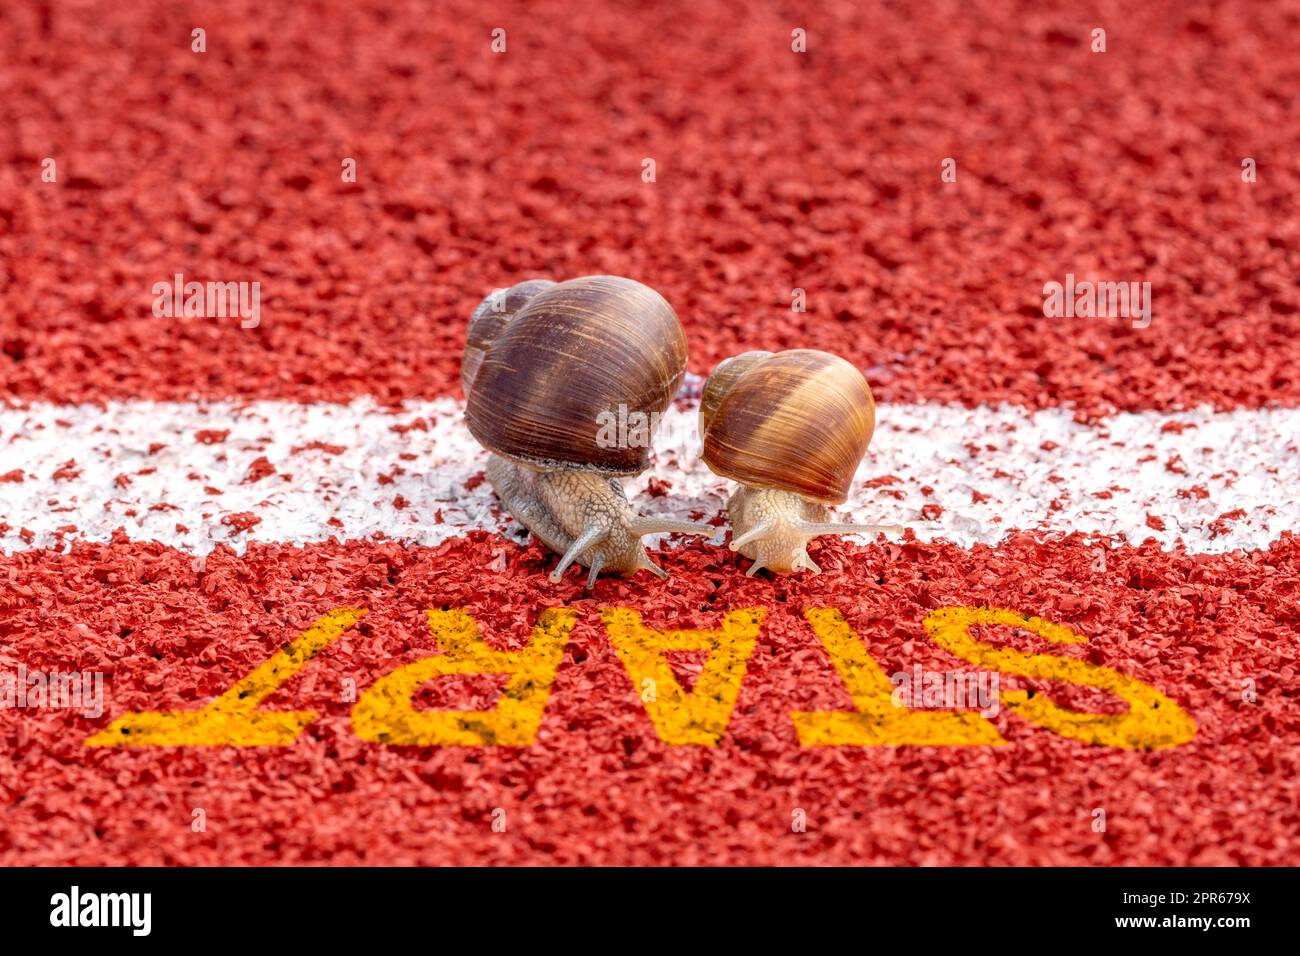 Close-up of racing snails on the start line Stock Photo